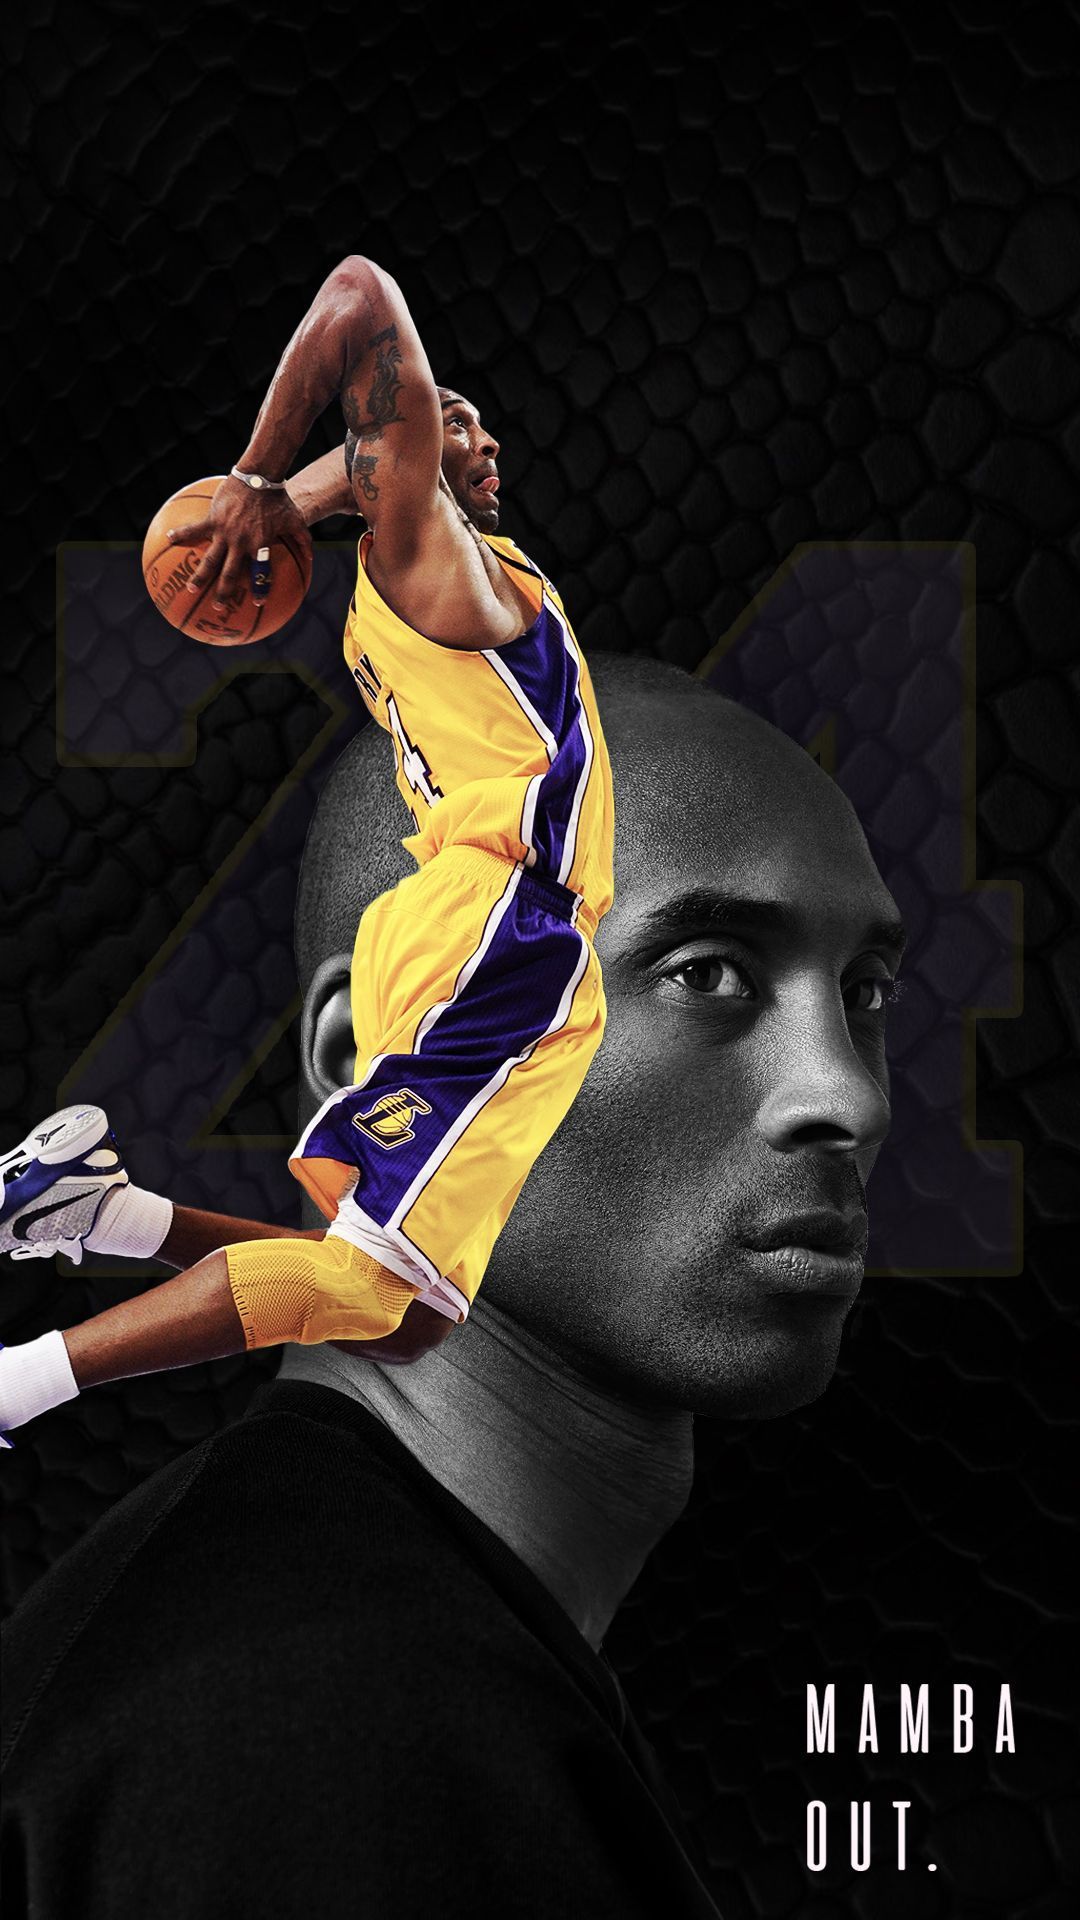 A collection of Kobe Bryant wallpaper for your phone. - Kobe Bryant